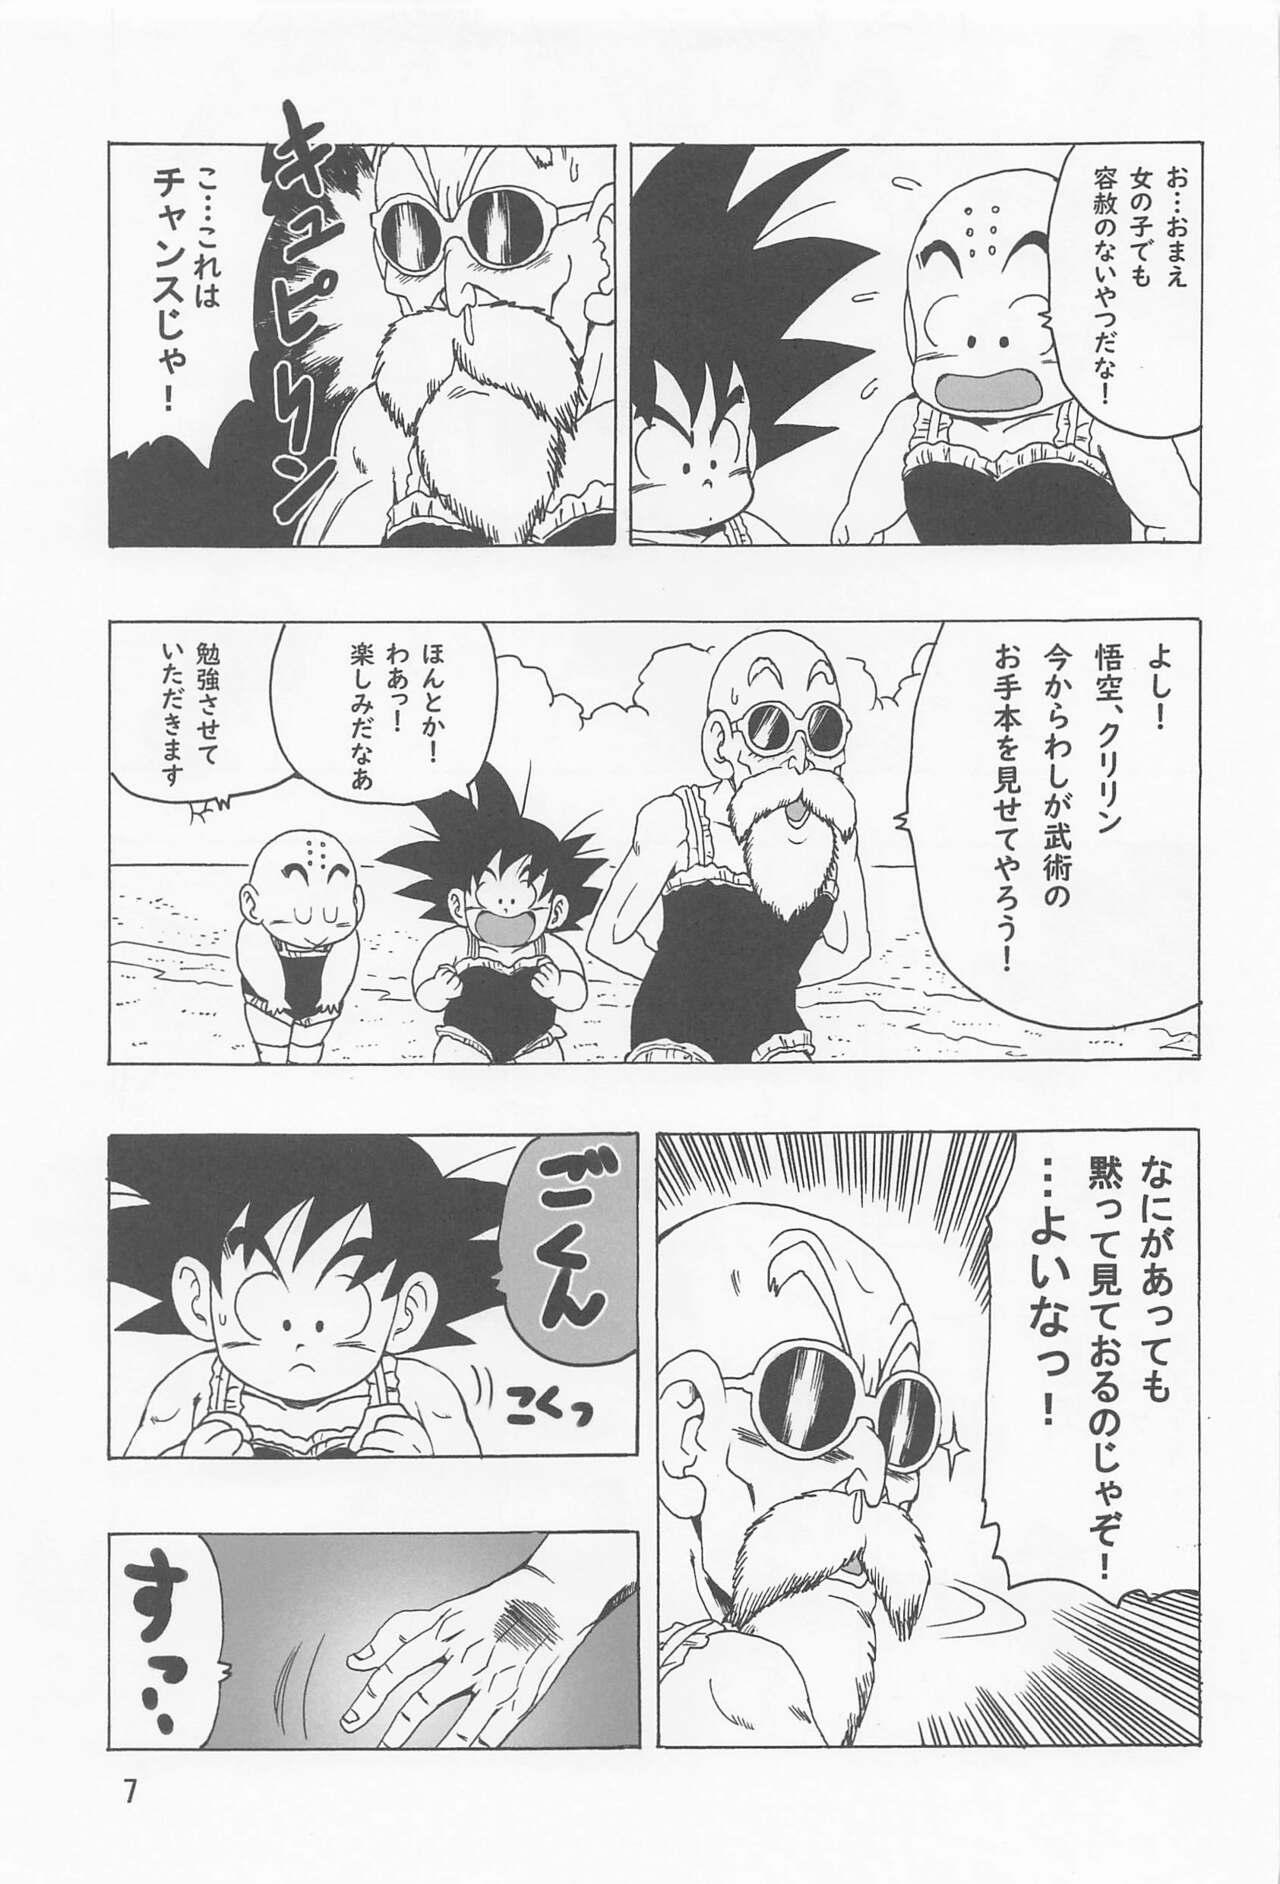 Maledom Episode of Lunch 1 - Dragon ball Solo - Page 8